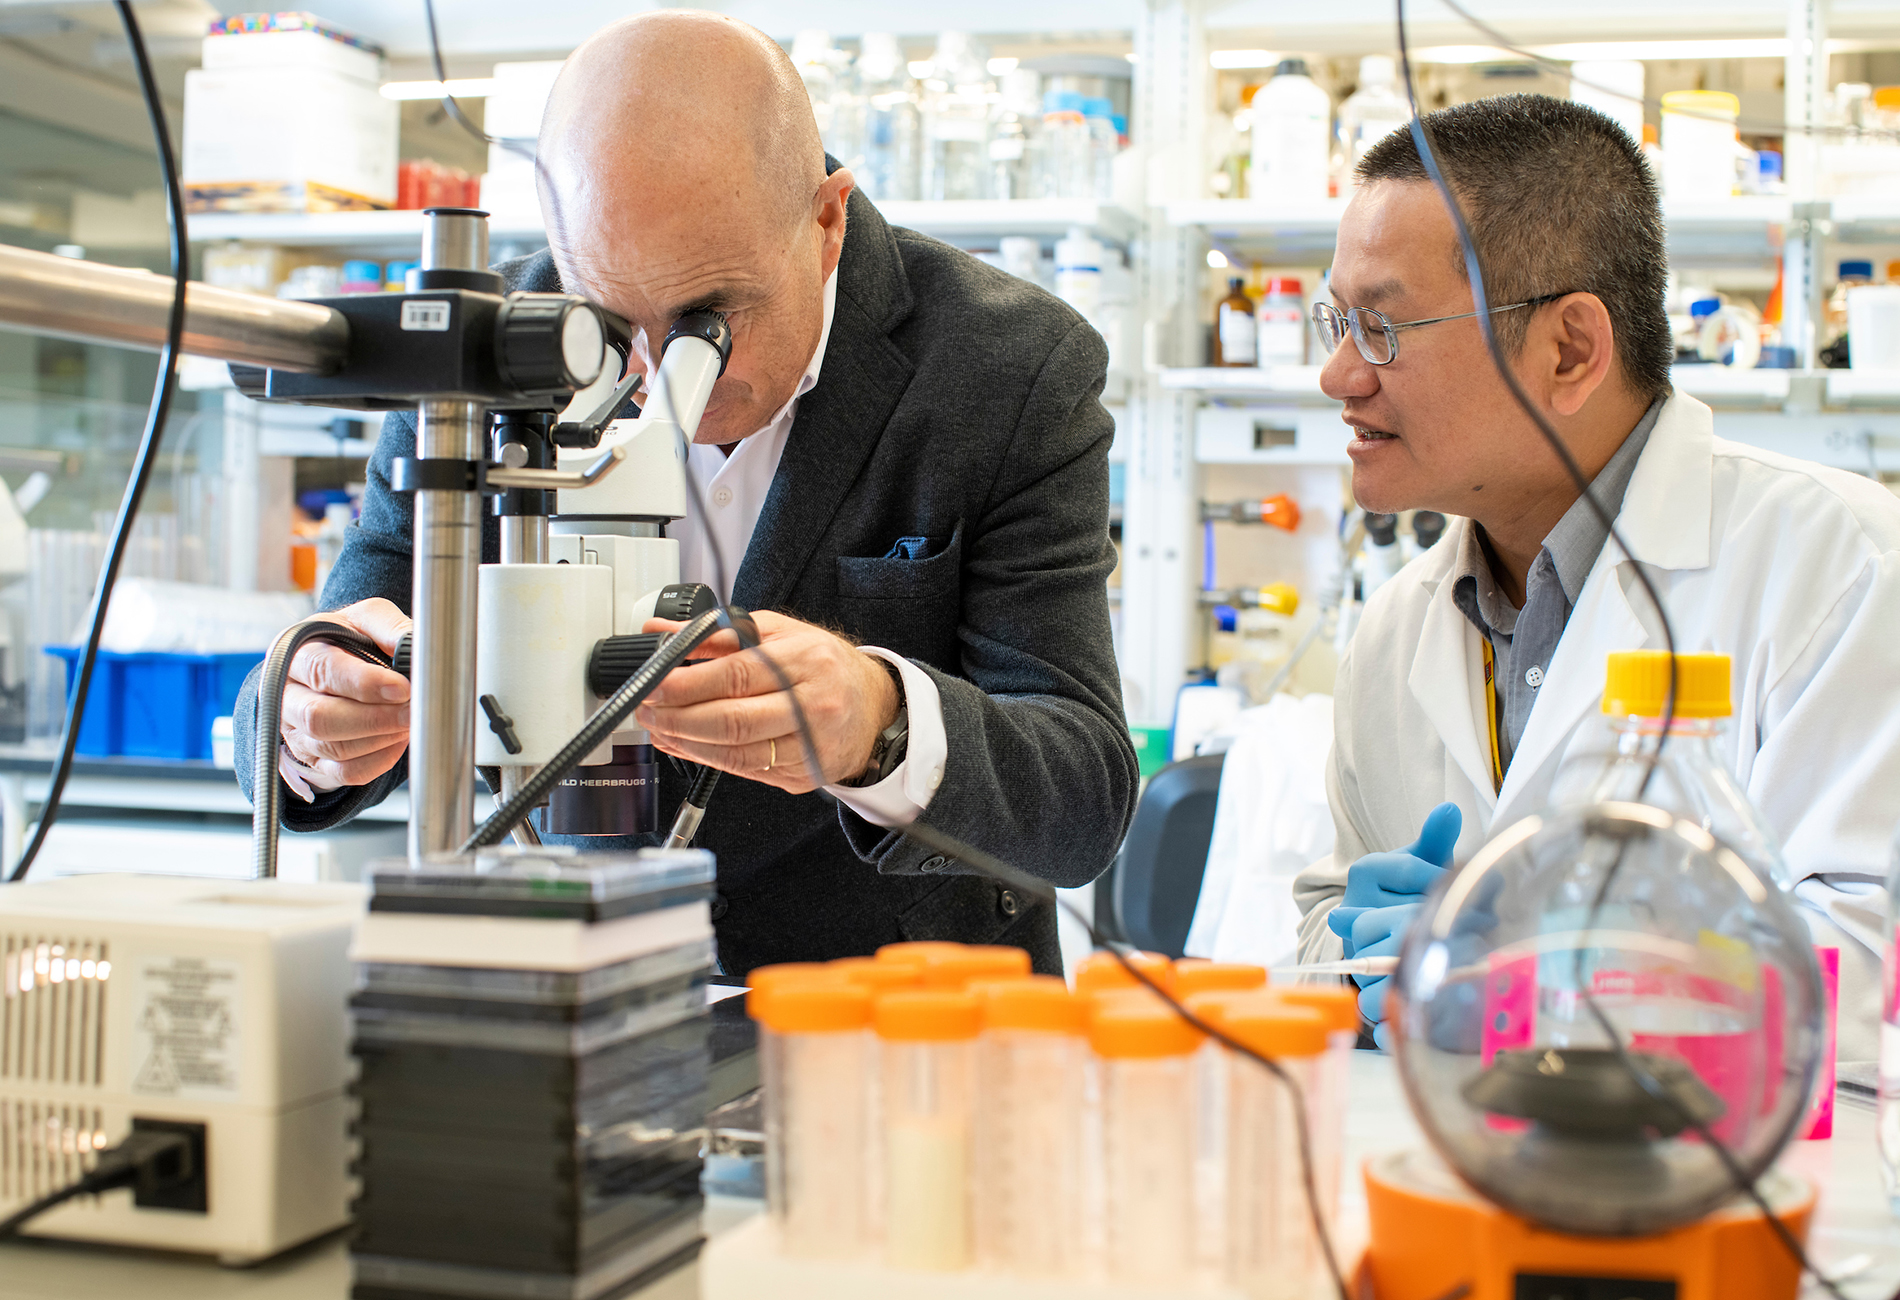 Jeremy Levin, chief executive officer of Ovid Therapeutics, looks through a microscope at slices of a mouse brain with scientist Shing Hong Lin in the company’s lab at Tufts Launchpad Biolabs in Boston, Massachusetts.